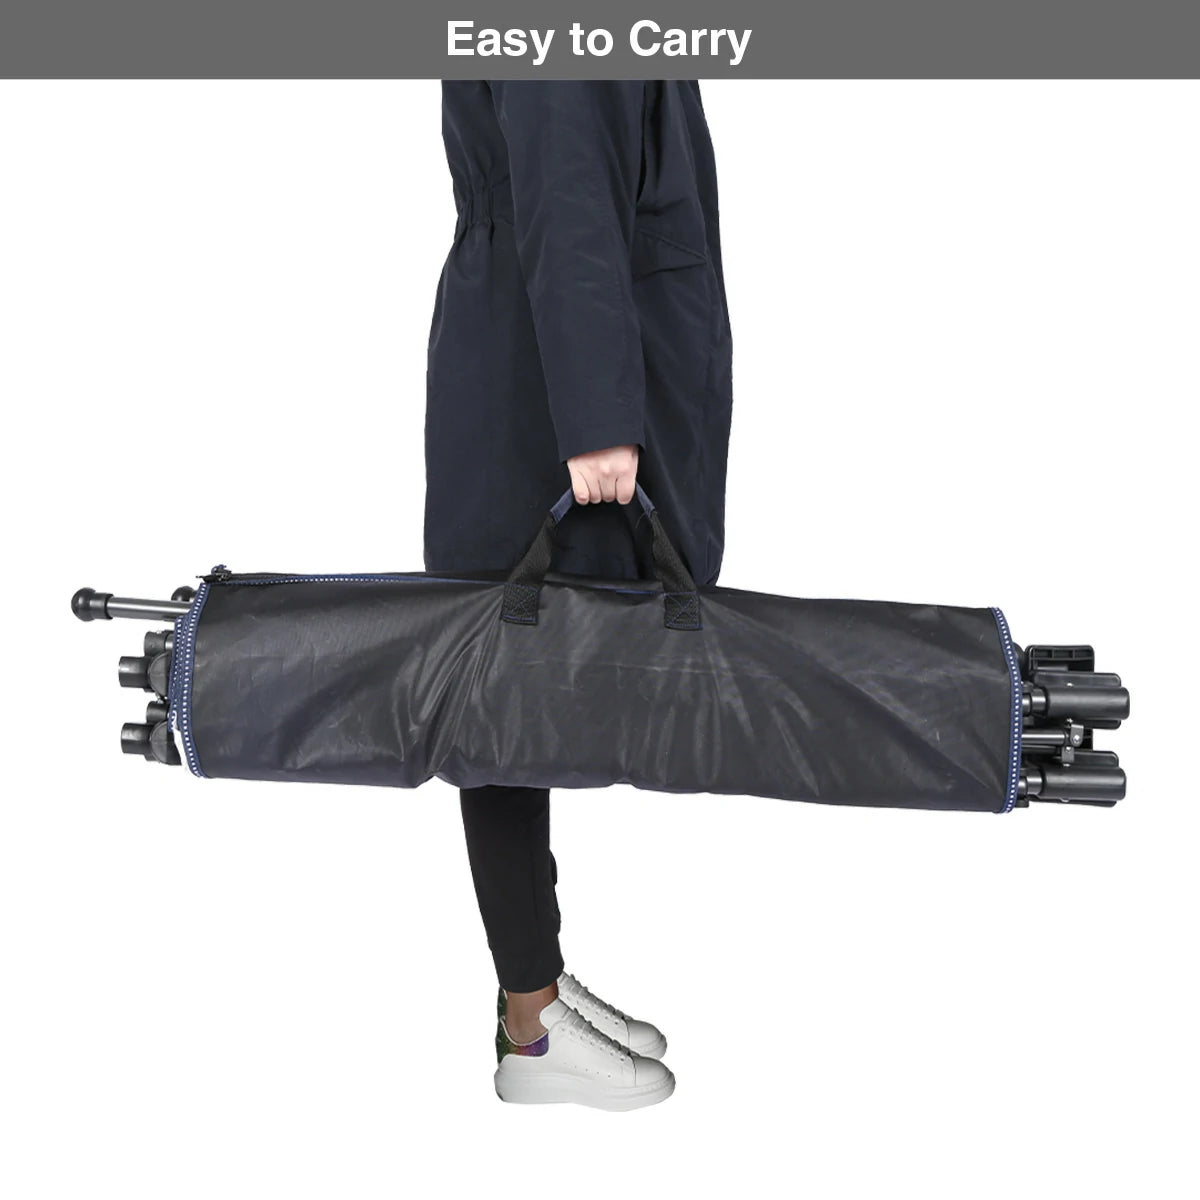 Portable Hammock with Stand and Carrying Bag